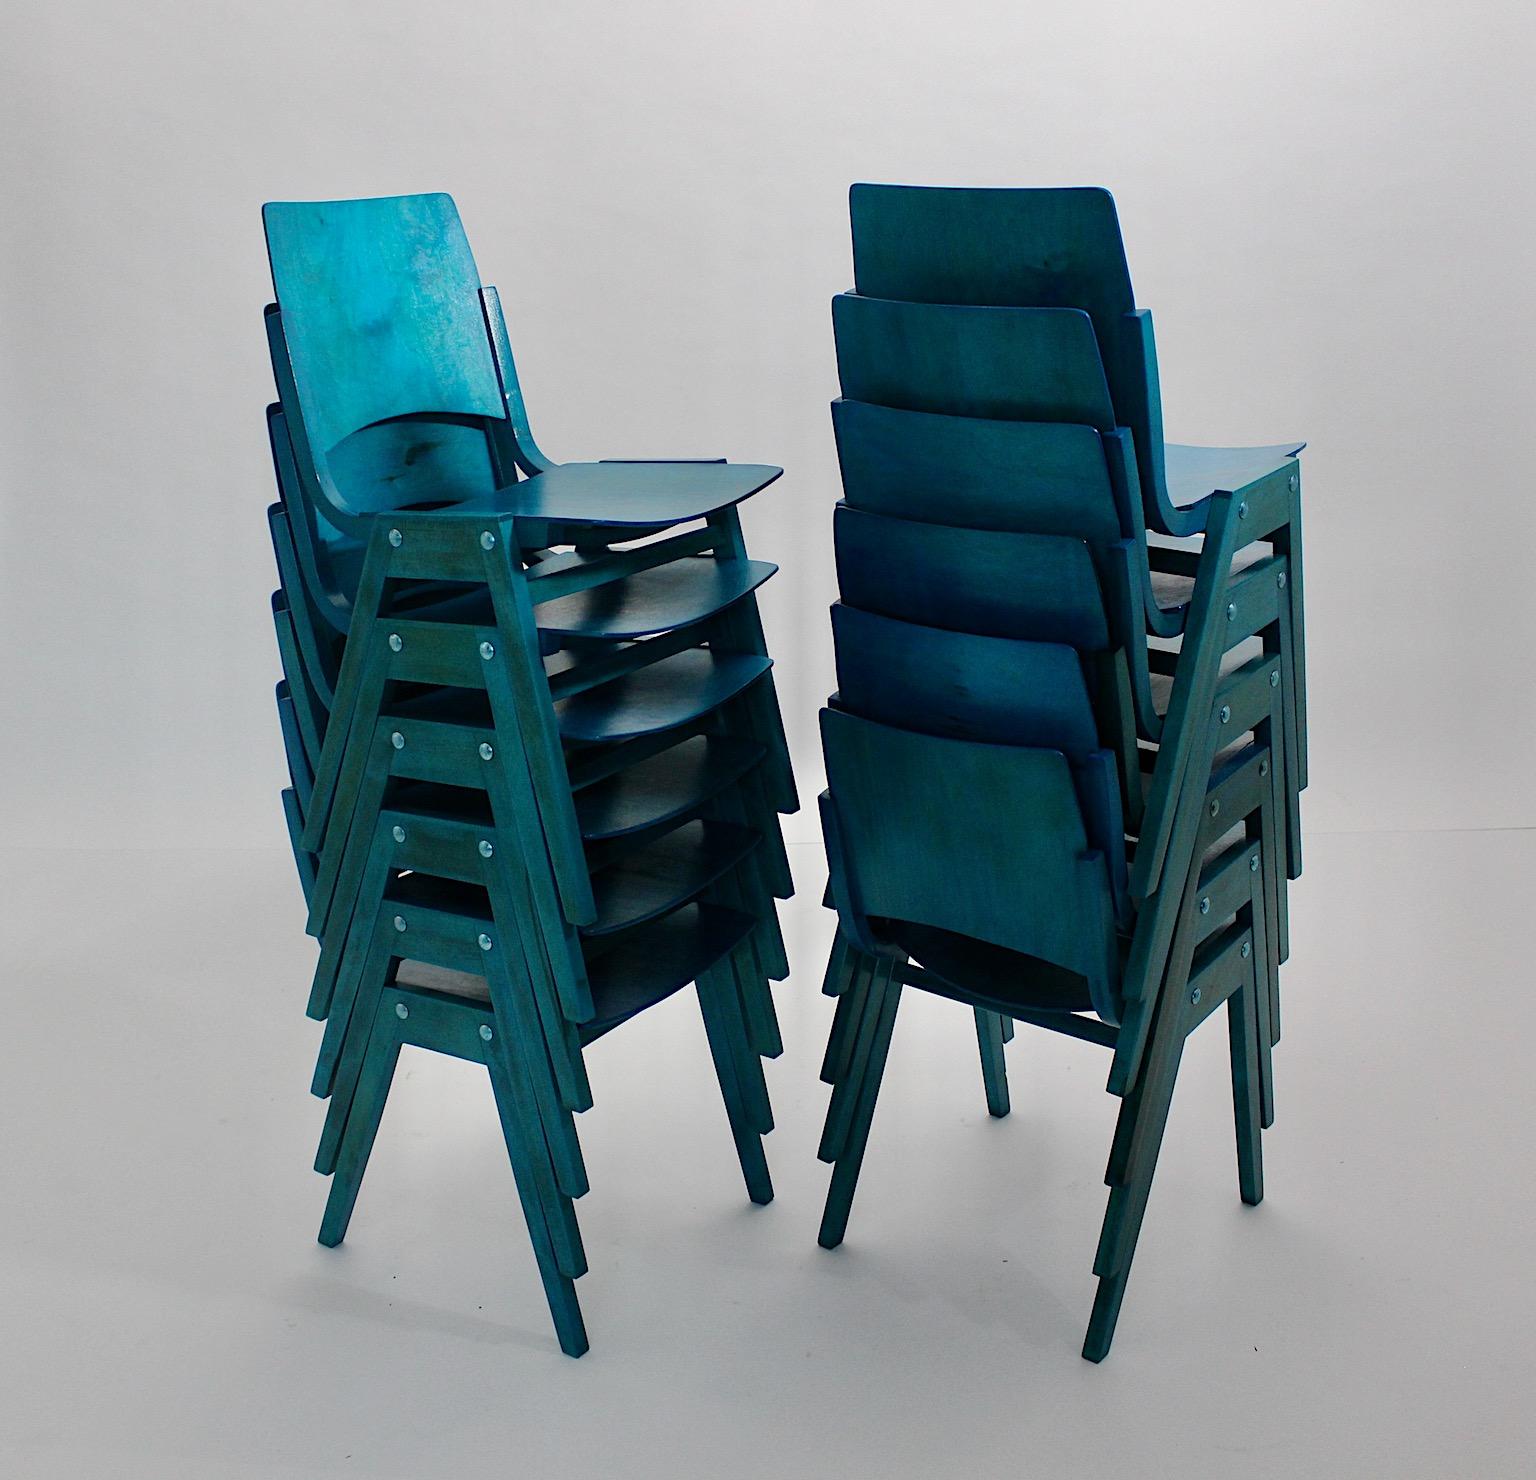 Mid-Century Modern twelve ( 12 ) dining chairs or chairs from beechwood and plywood in ocean blue teal color tone by Roland Rainer 1952 Vienna for Emil and Alfred Pollack. 
A gorgeous set of twelve ( 12 ) dining room chairs by Roland Rainer 1952